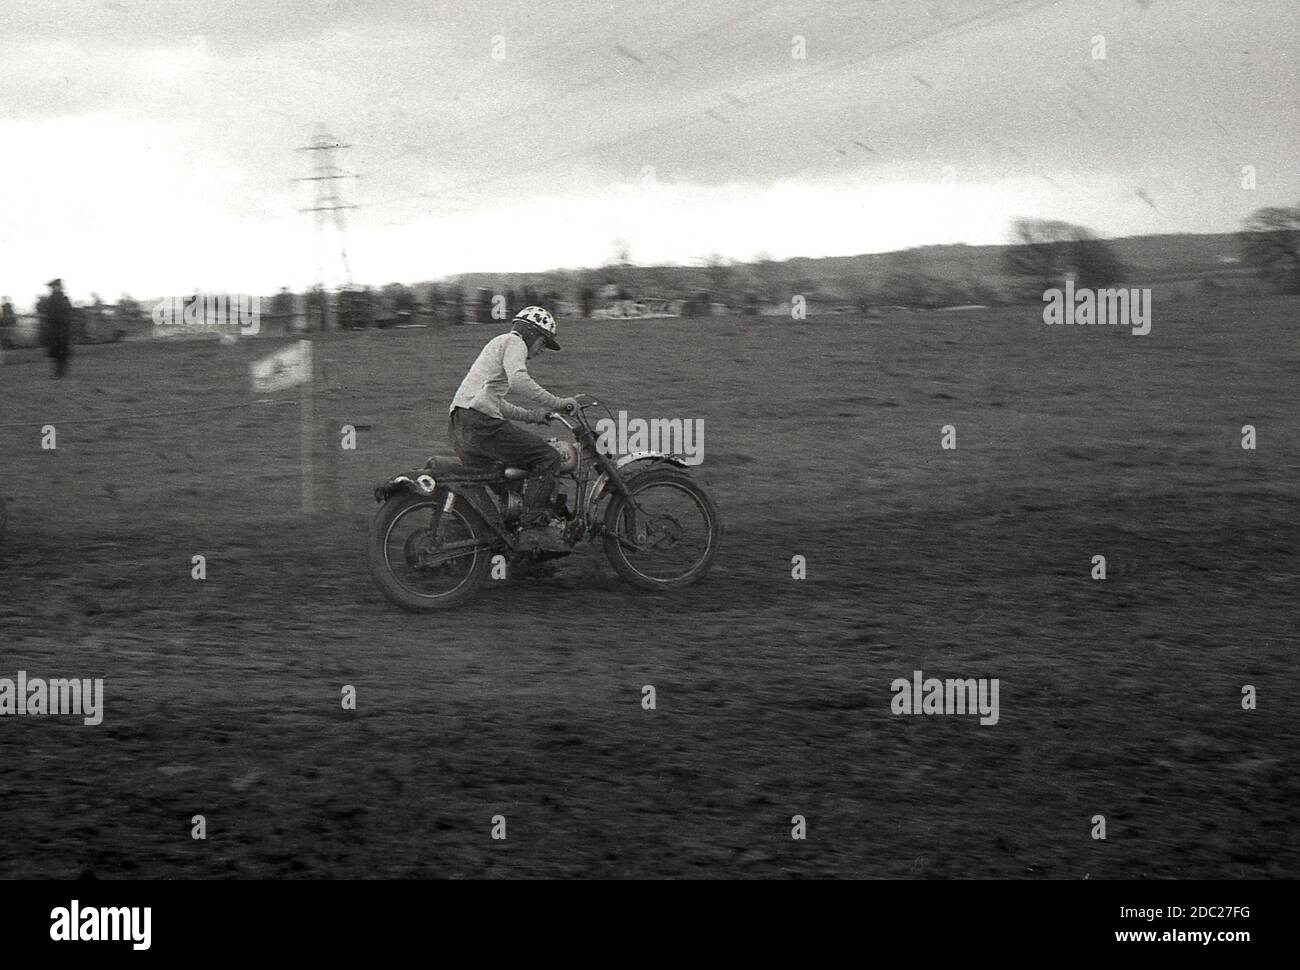 Late 1950s, a male competitor in a motorcycle scrambling event, riding across a muddy trail. Invented in 1924, in Camberley, Surrey, England, the bikes used to scramble in '50s and early '60s were little different from the road bikes of the time, with very little suspension. Today the sport is known as motocross – the French name for cross-country motorcycling – and referred to as Supercross in the USA. Stock Photo